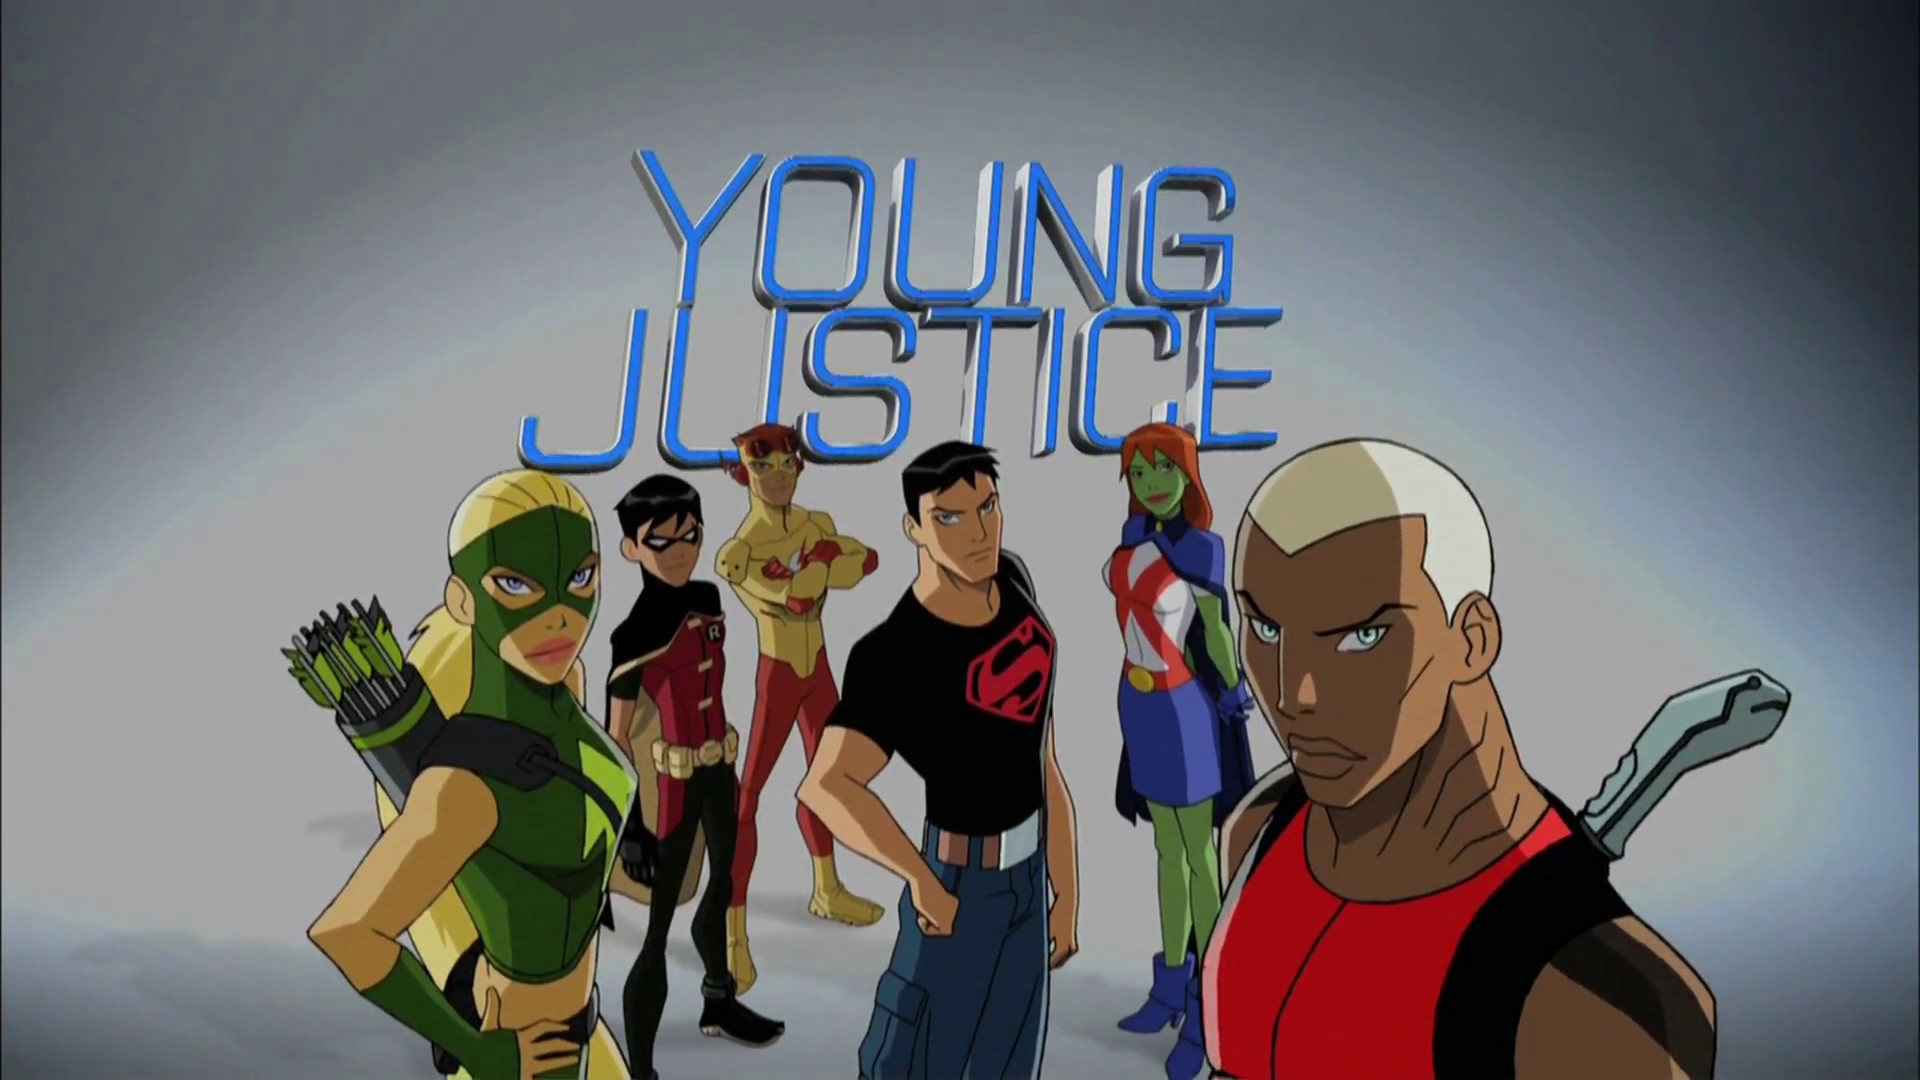 1920x1080 Young Justice: End Game Wallpaper 24 - 1920 X 1080